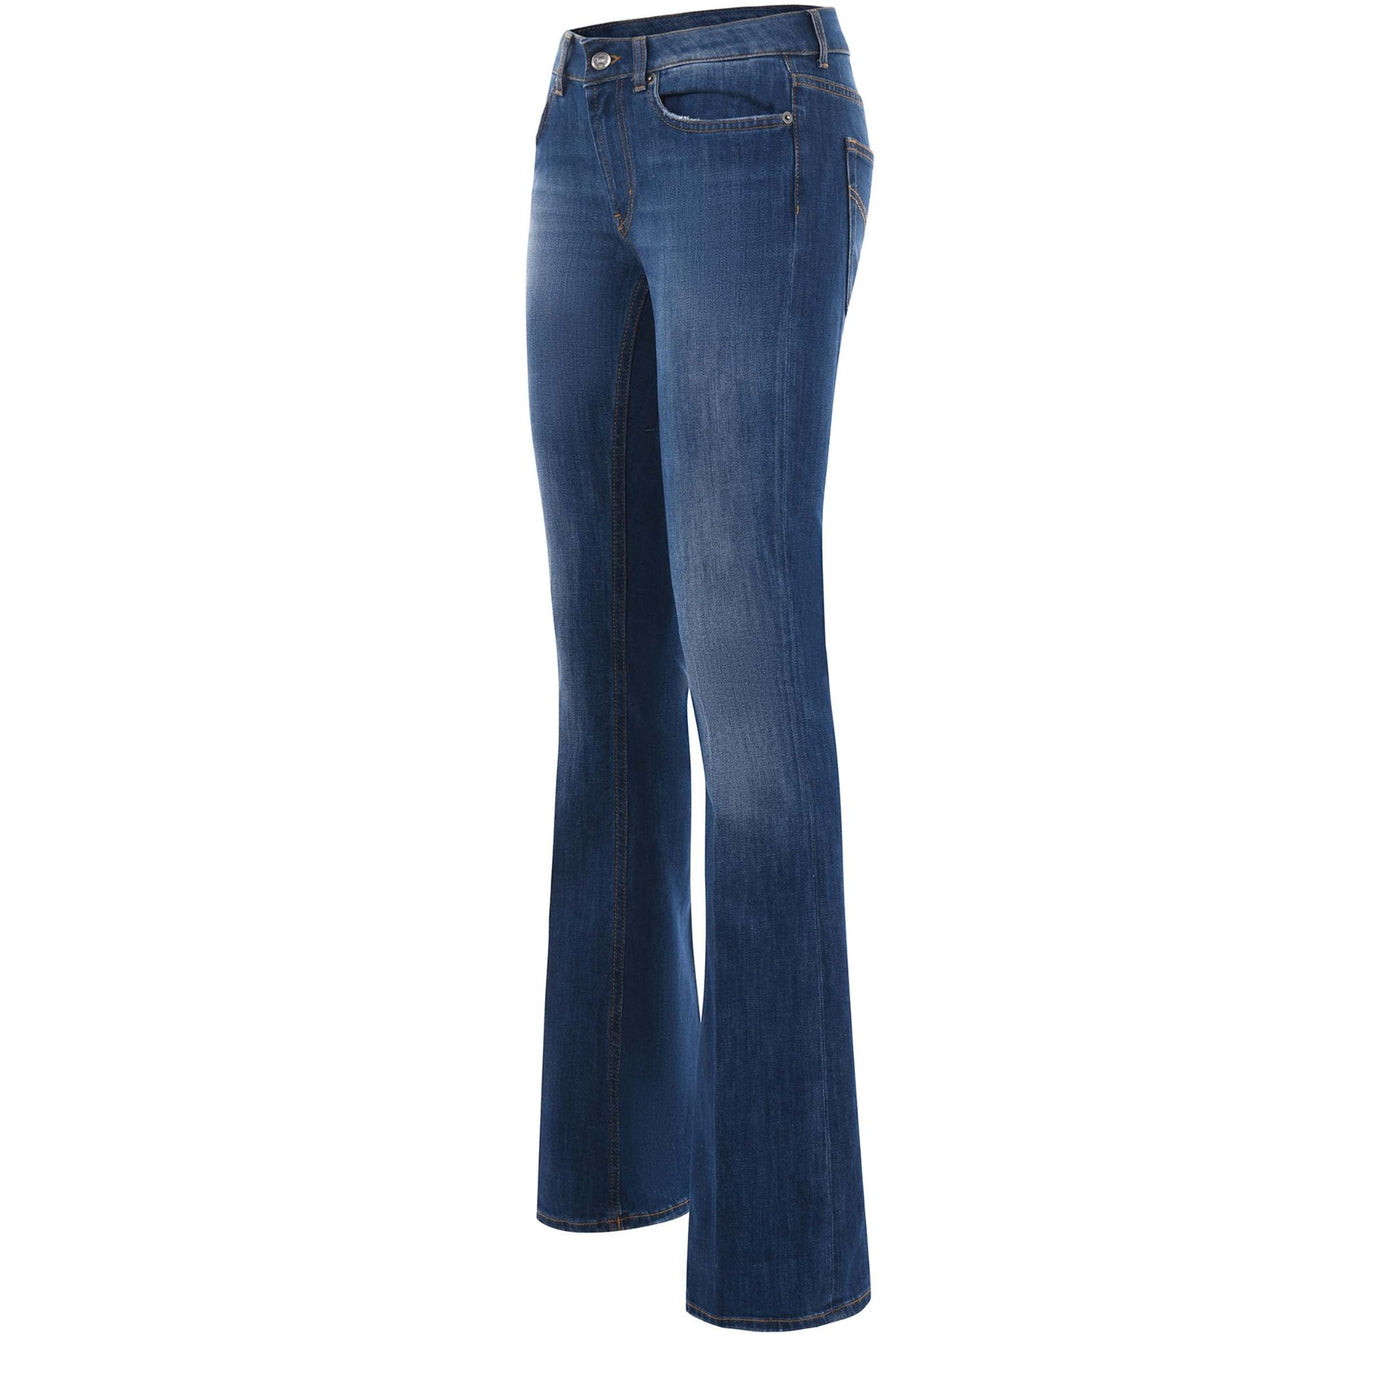 Women's flared jeans with worn effect